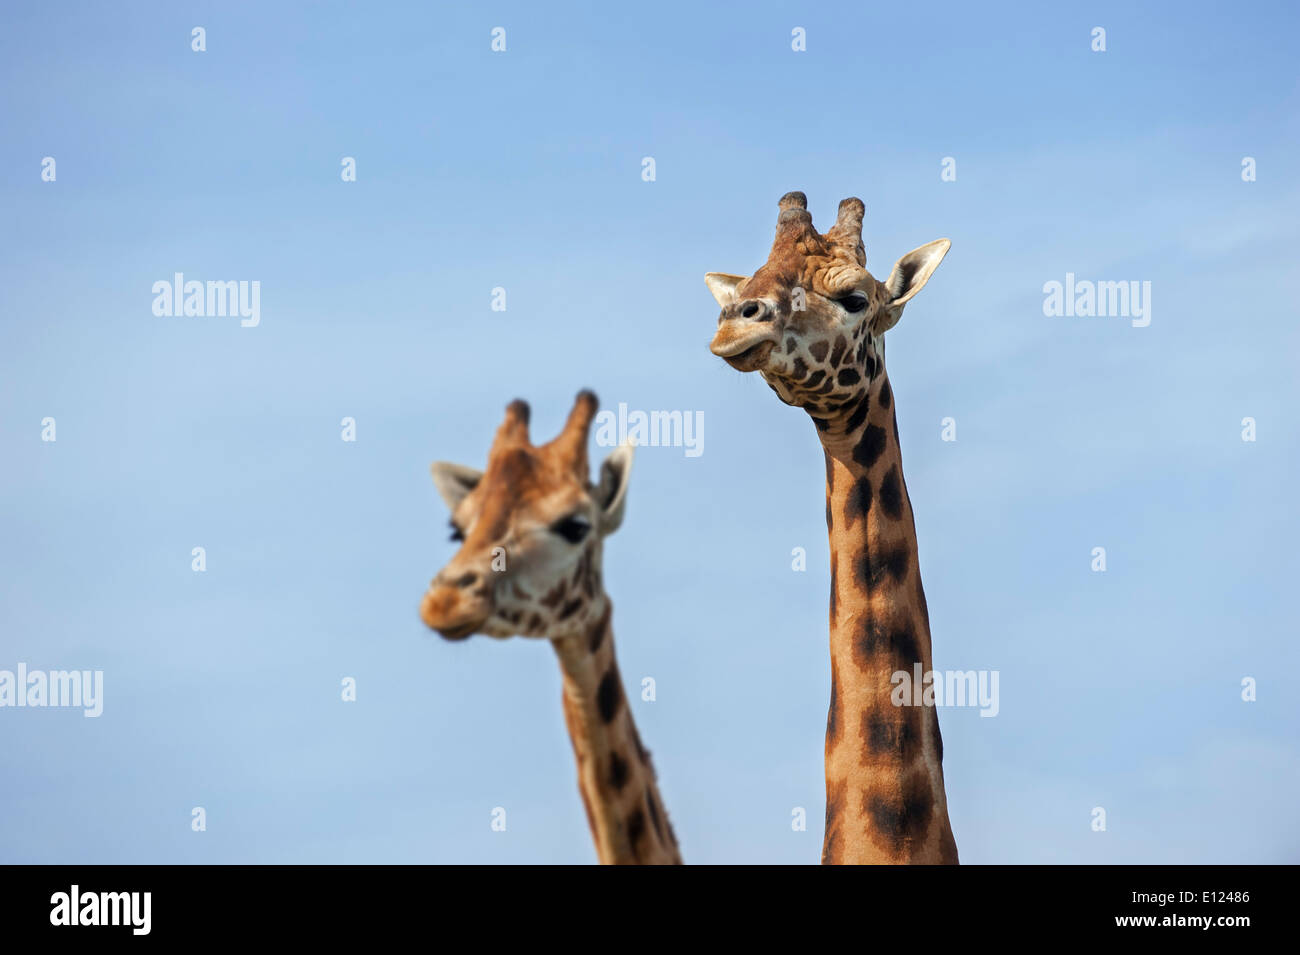 Male and female giraffes (Giraffa camelopardalis), close up of heads against blue sky Stock Photo